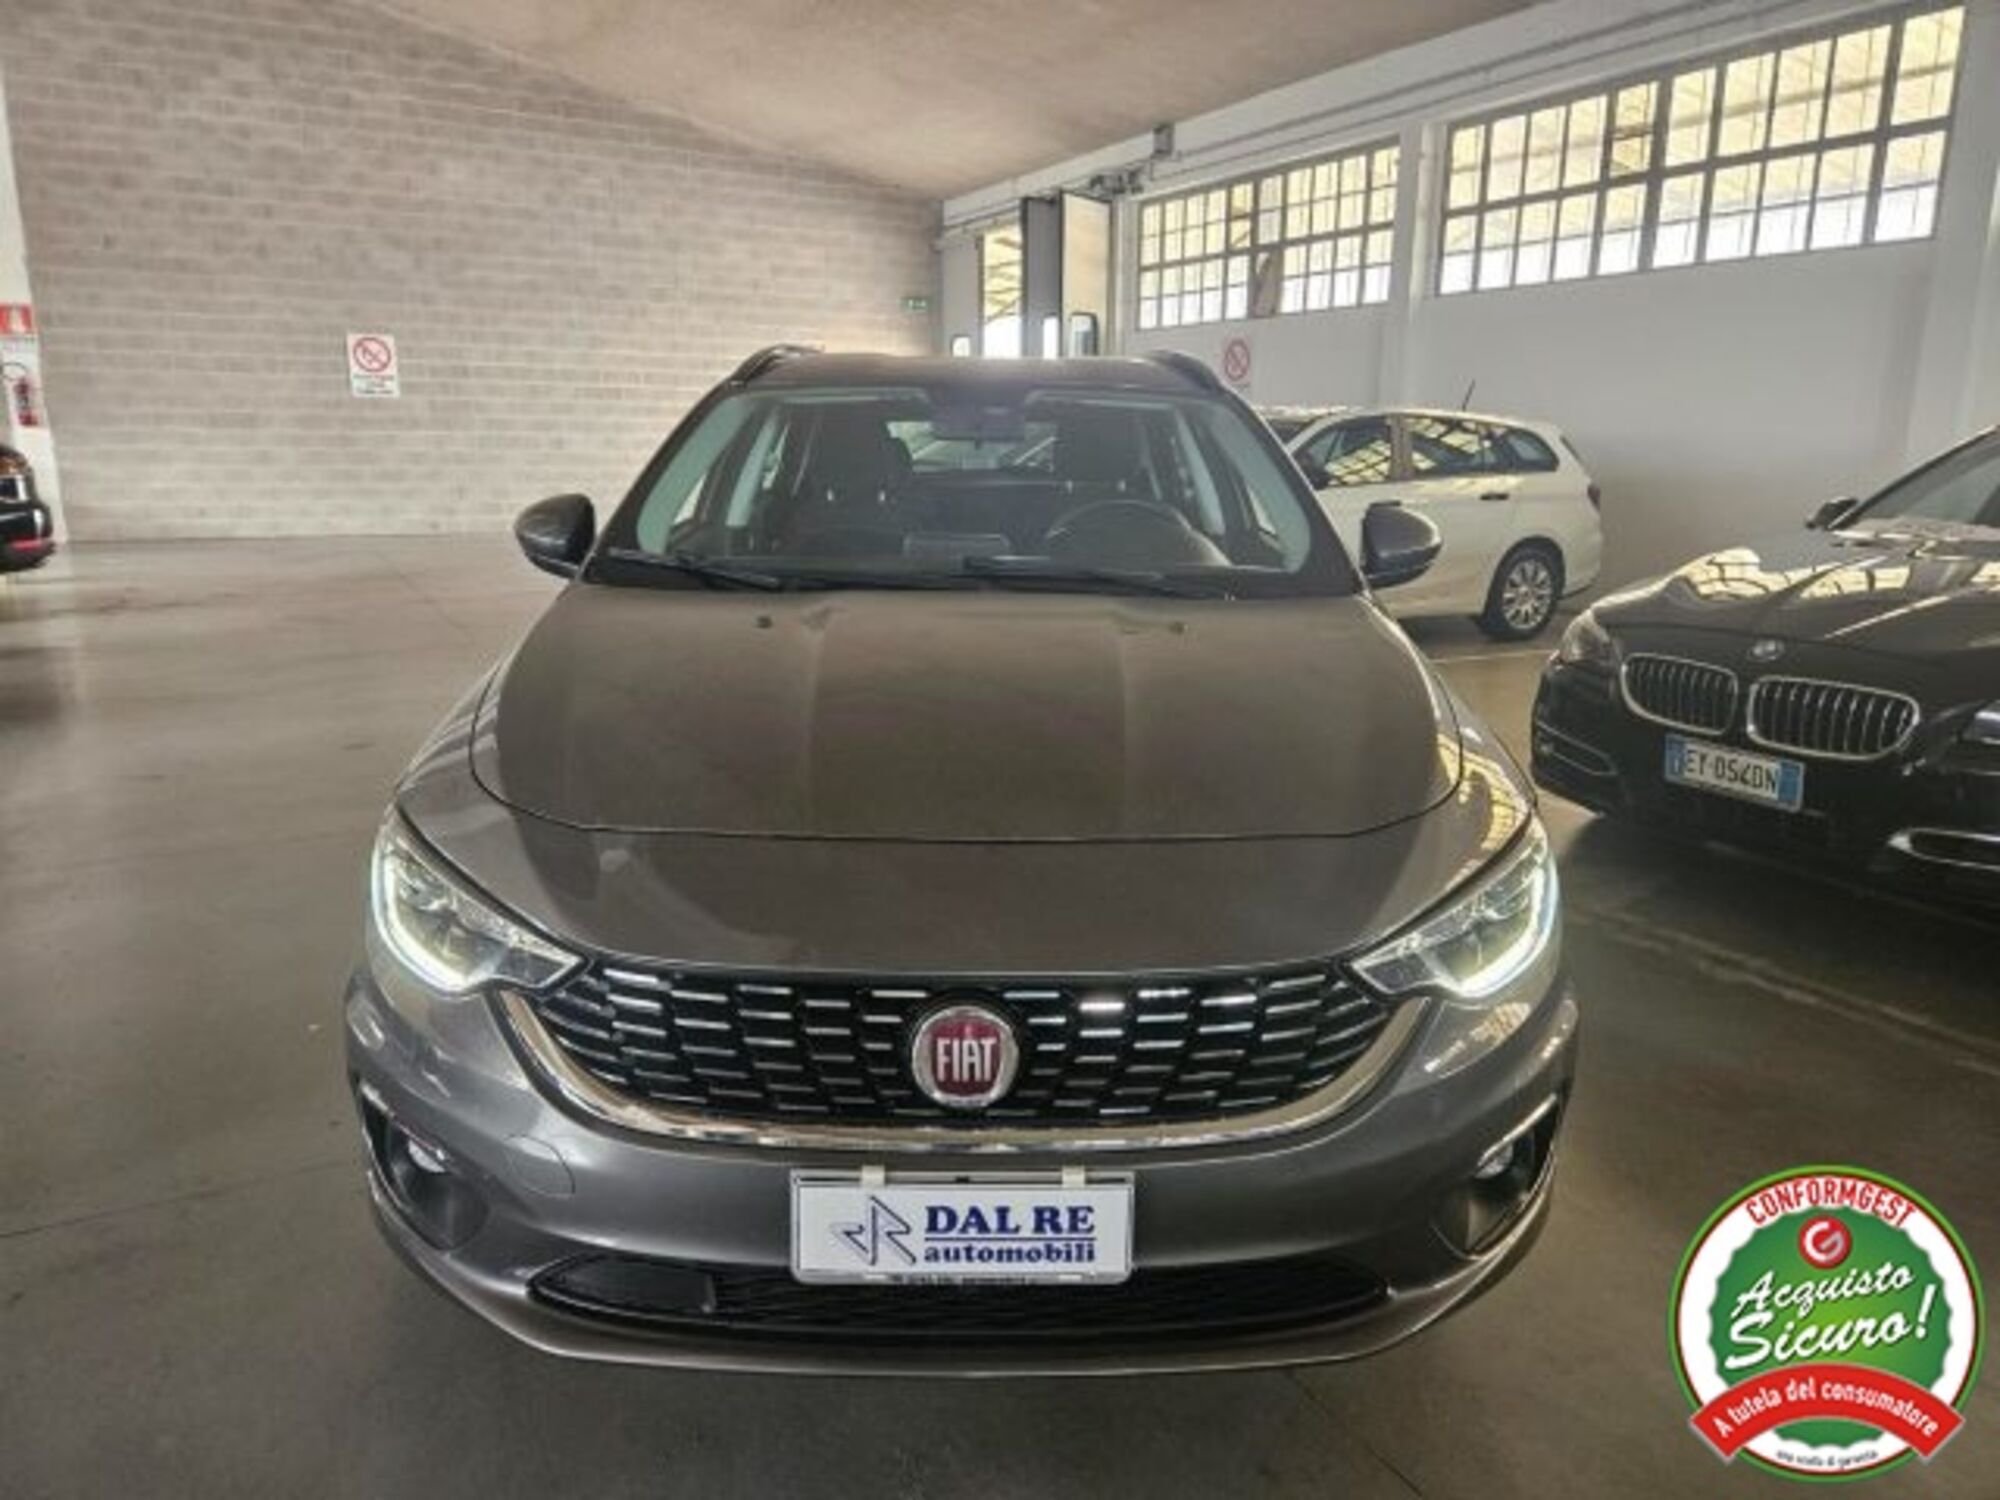 Fiat Tipo Station Wagon Tipo 1.6 Mjt S&S DCT SW S-Design my 18